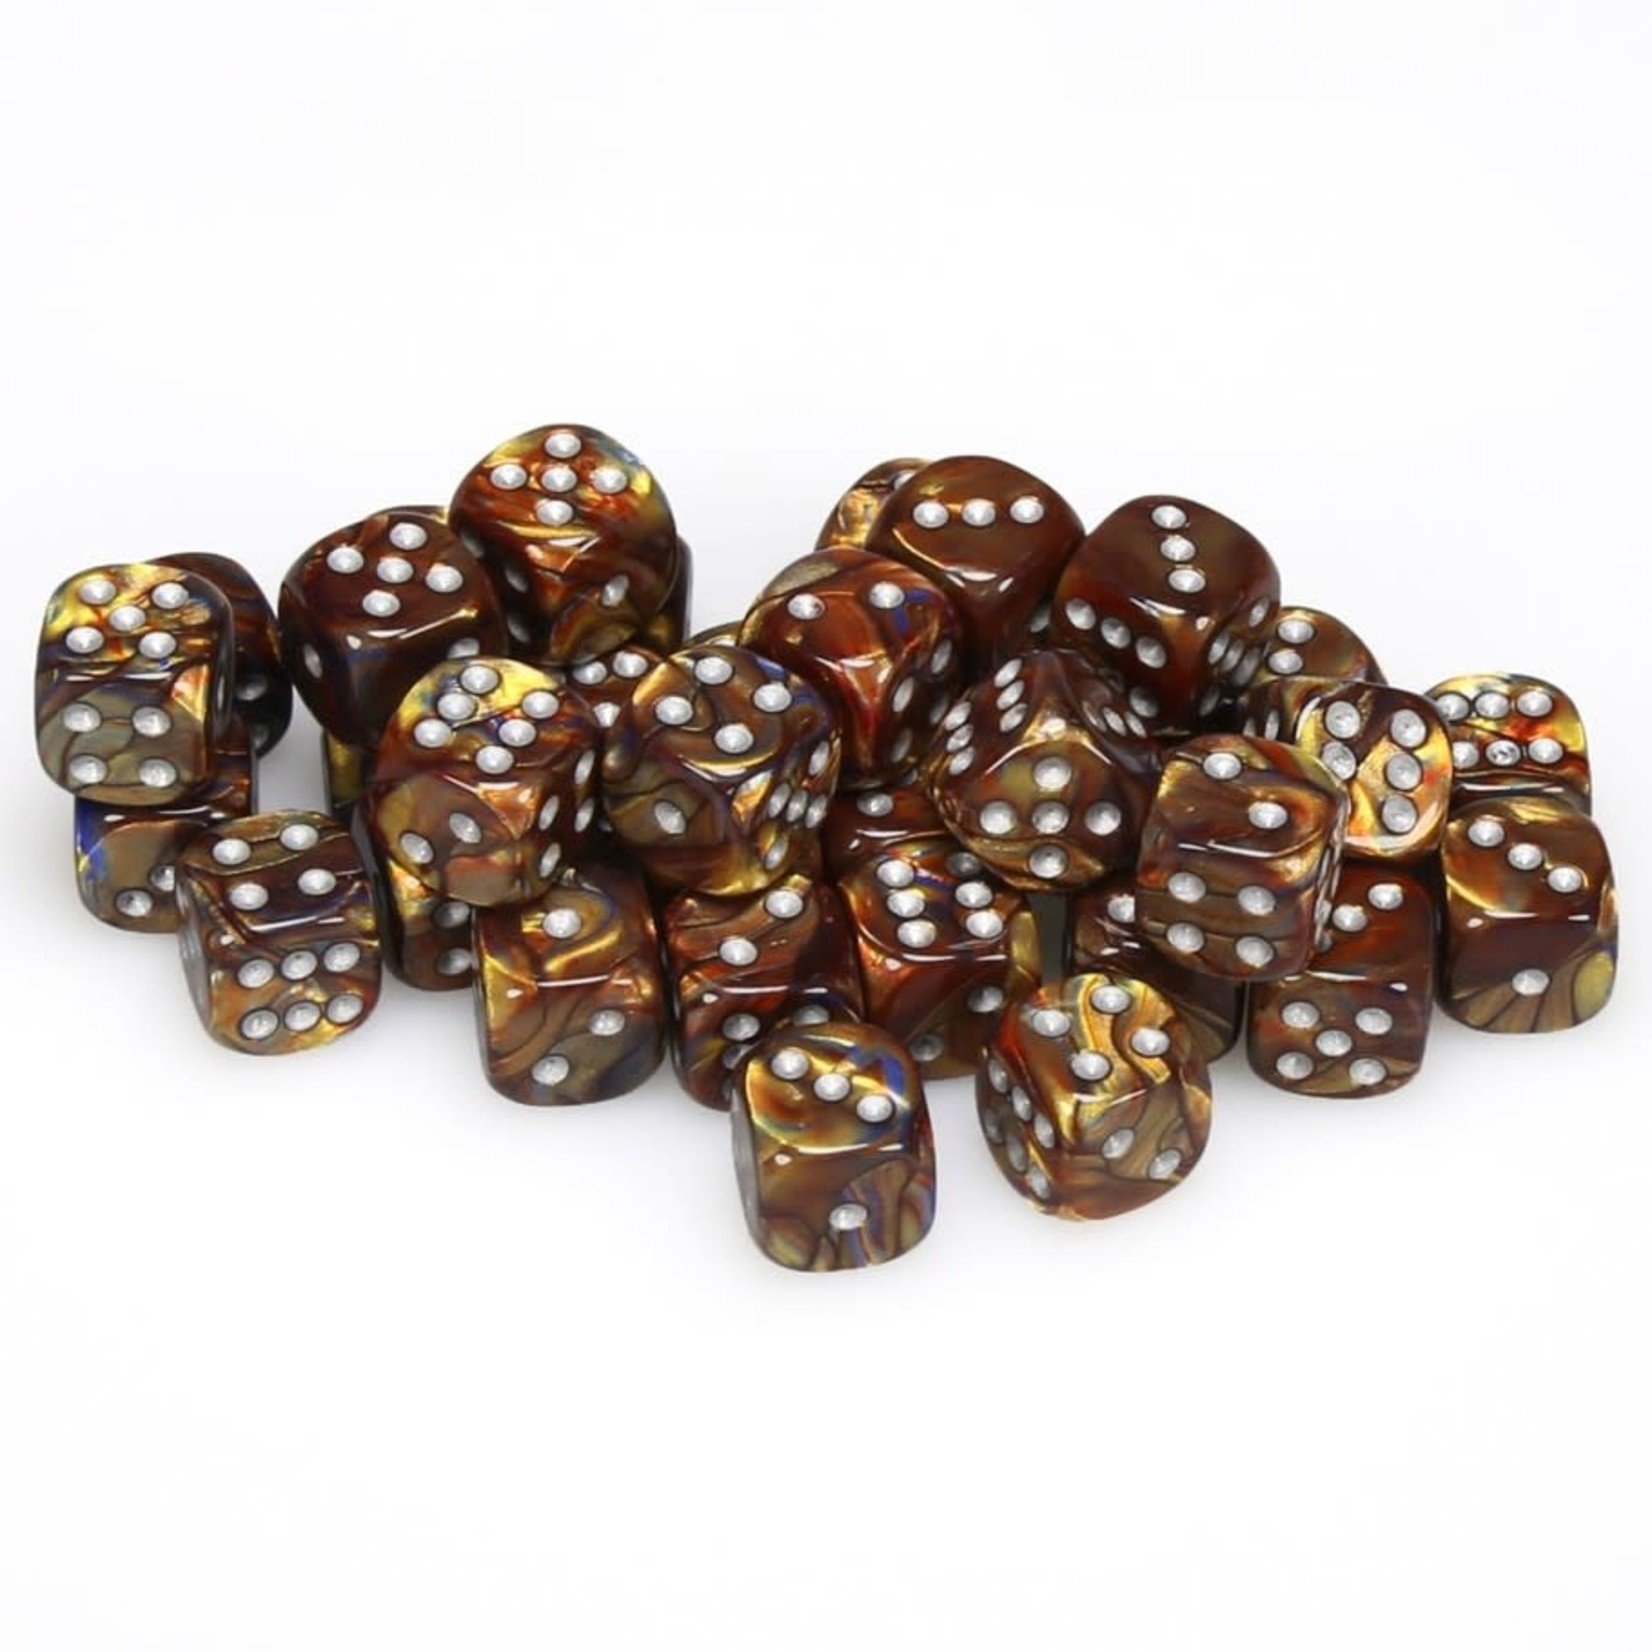 Chessex Chessex Lustrous Gold with Silver 12 mm d6 36 die set